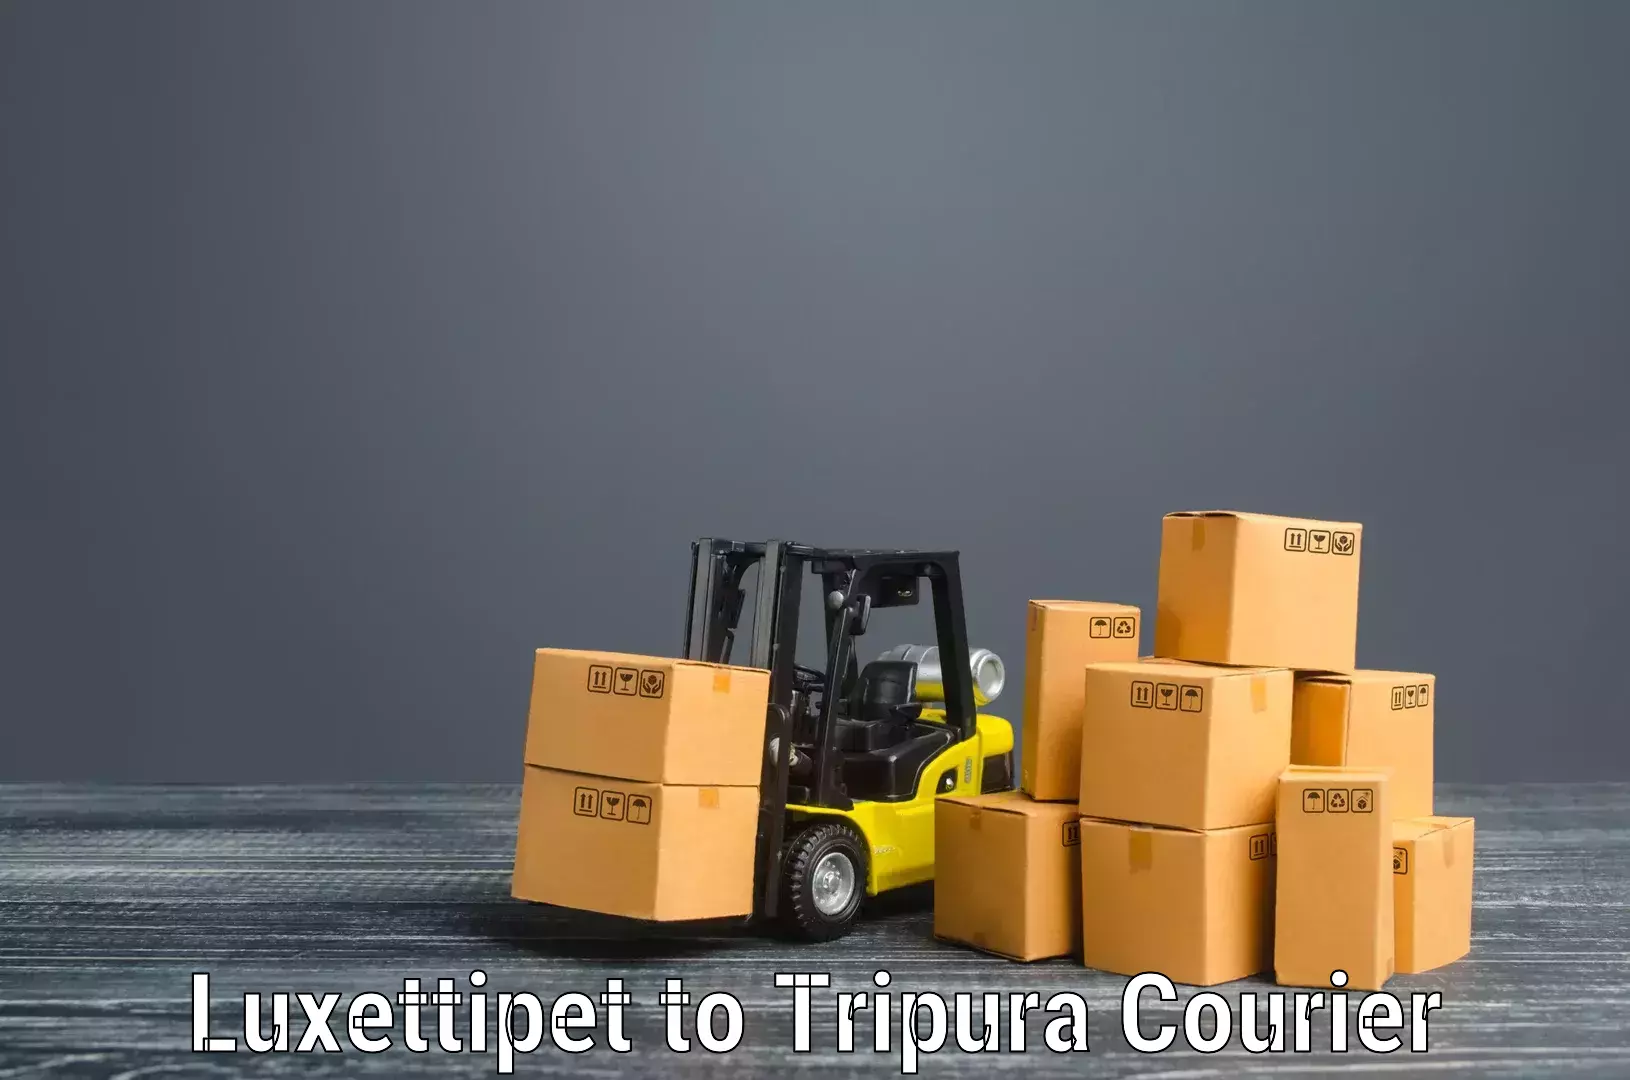 Expert goods movers Luxettipet to Udaipur Tripura